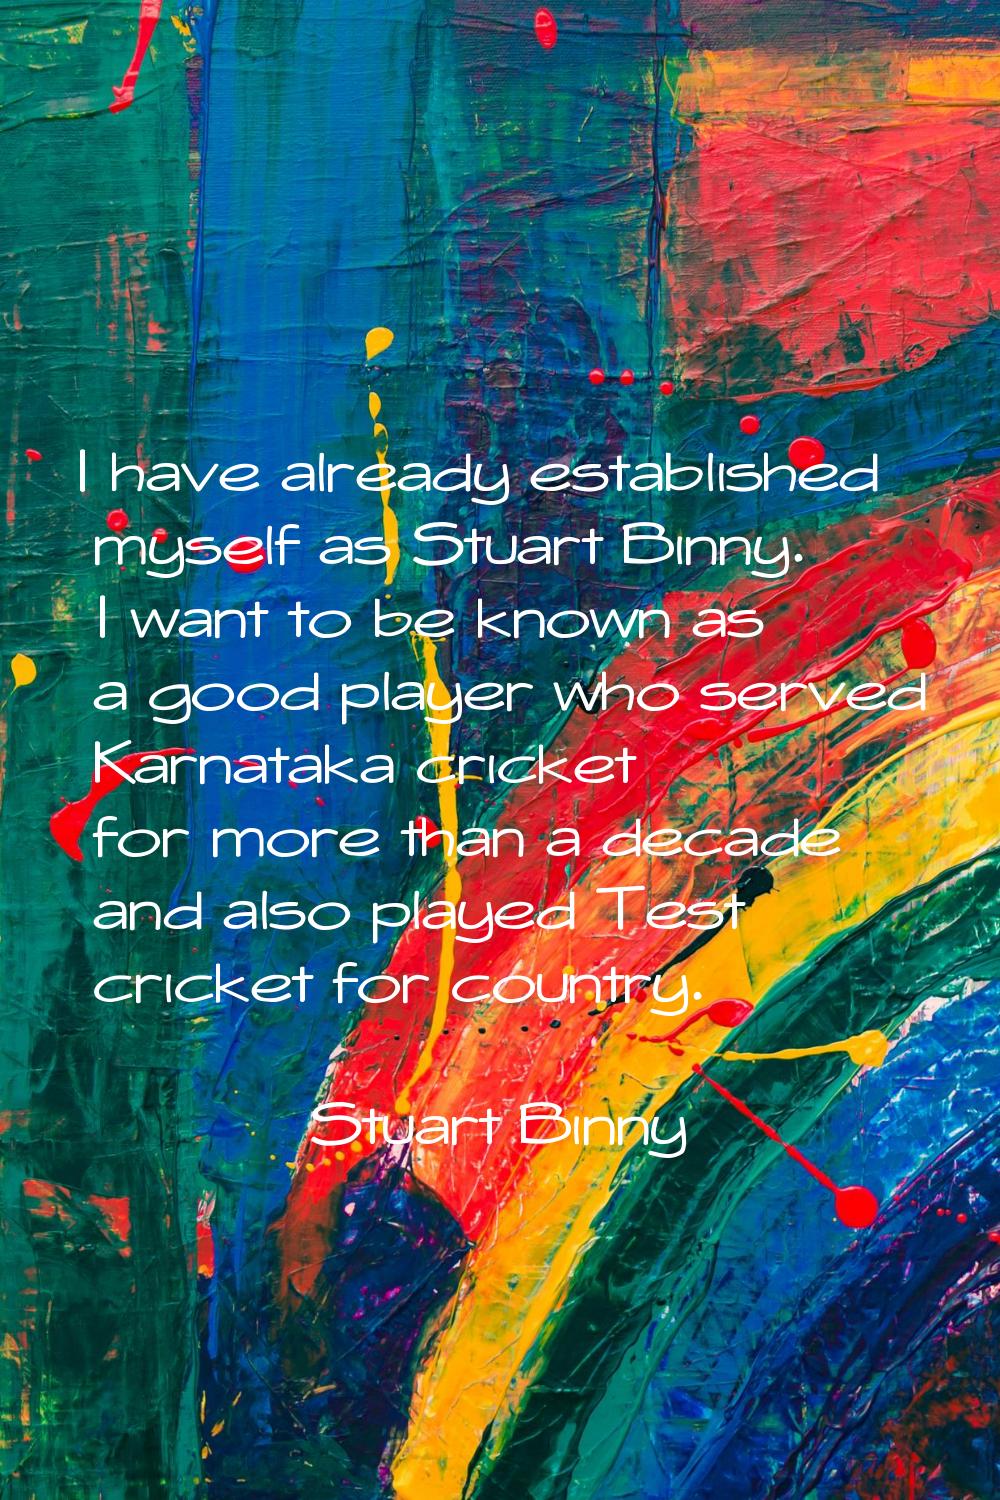 I have already established myself as Stuart Binny. I want to be known as a good player who served K